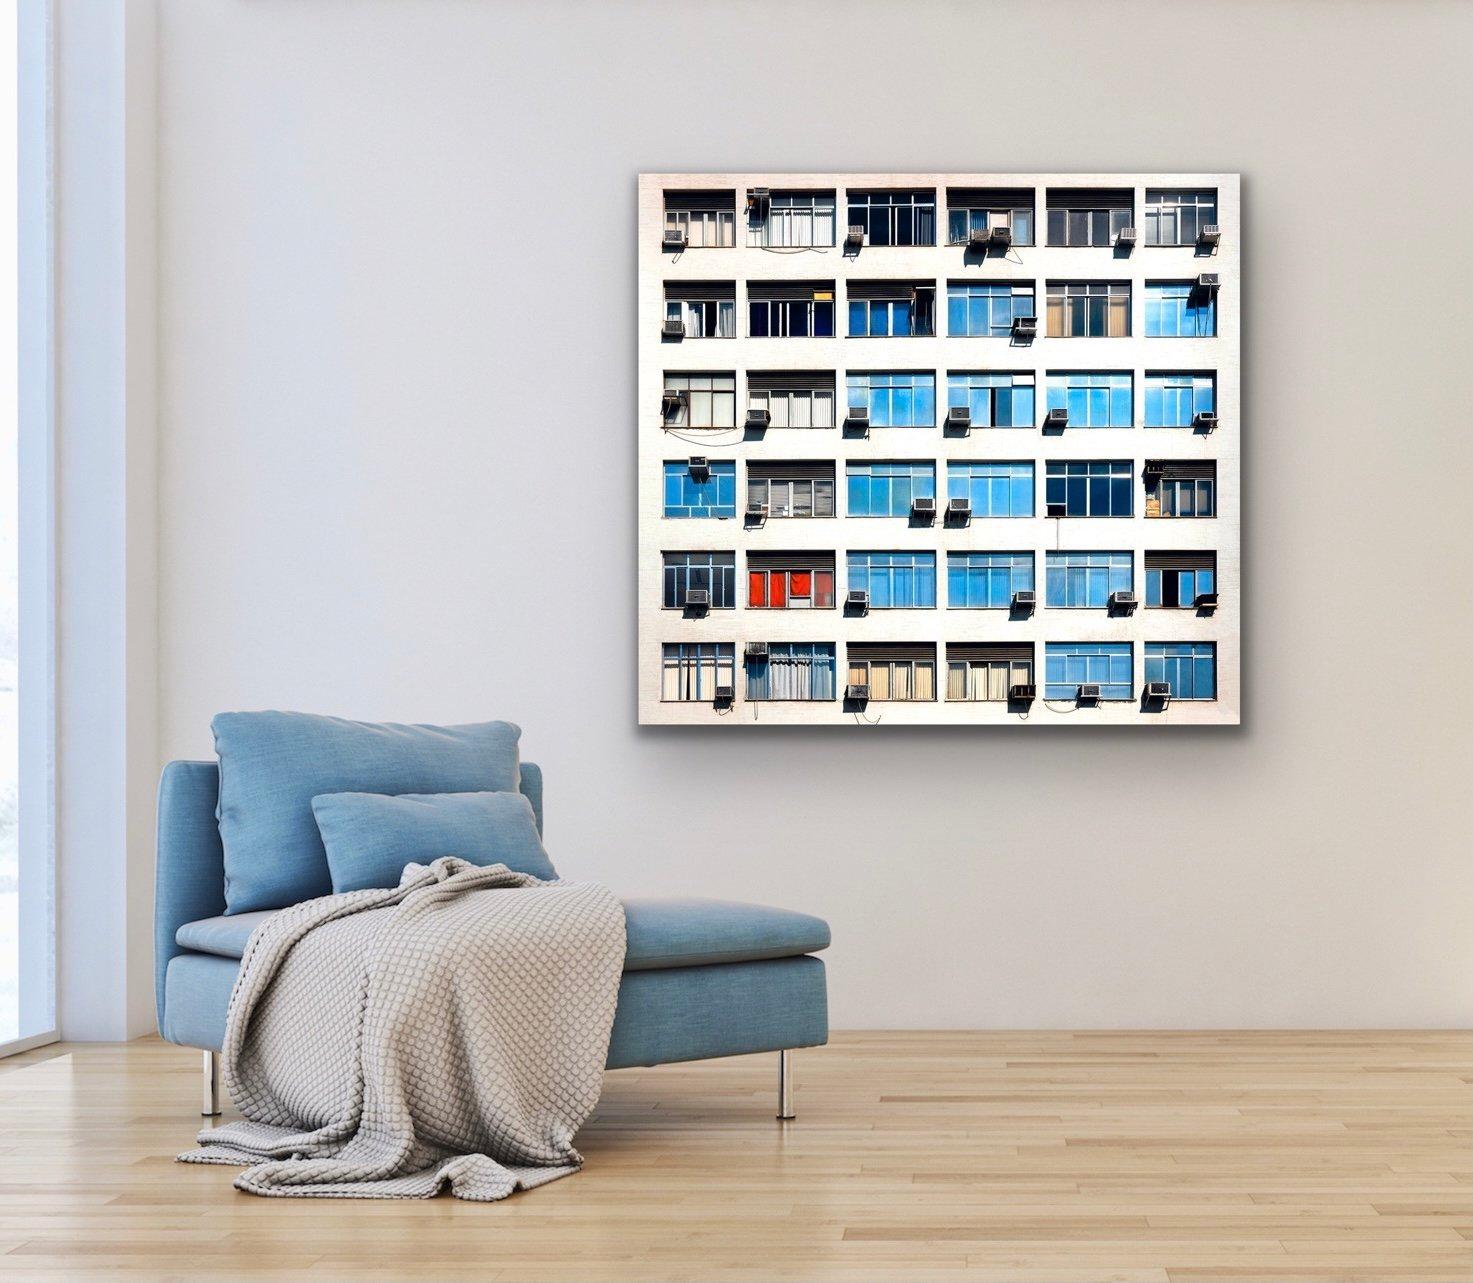 18 Flats by Barry Cawston 120 x 110cm C-type Photo print with Acrylic Face Mount en vente 1